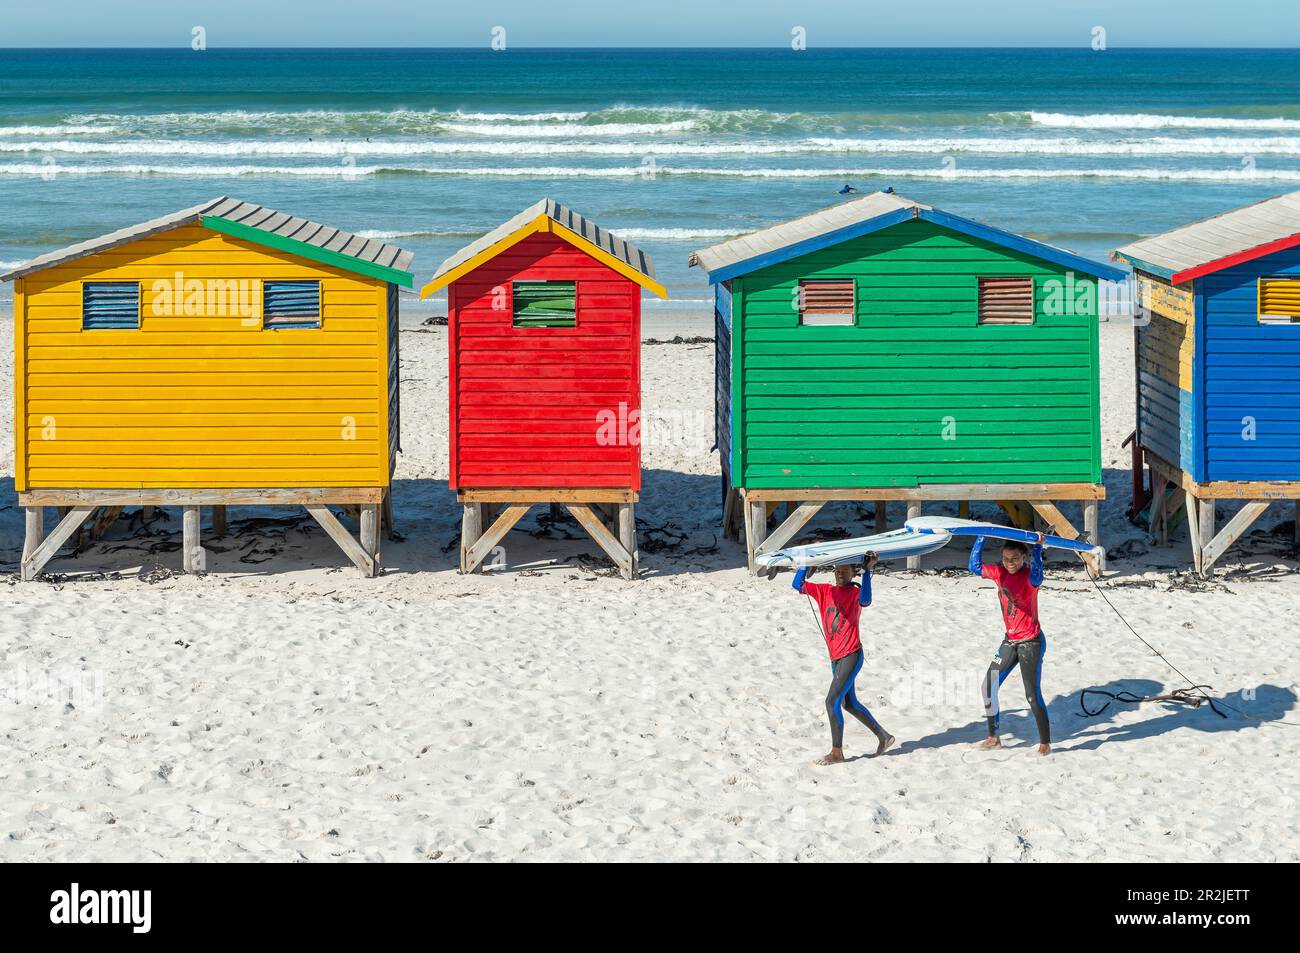 Smiling surfers by beach cabins and huts of Muizenberg beach, surfing spot near Cape Town, South Africa. Stock Photo